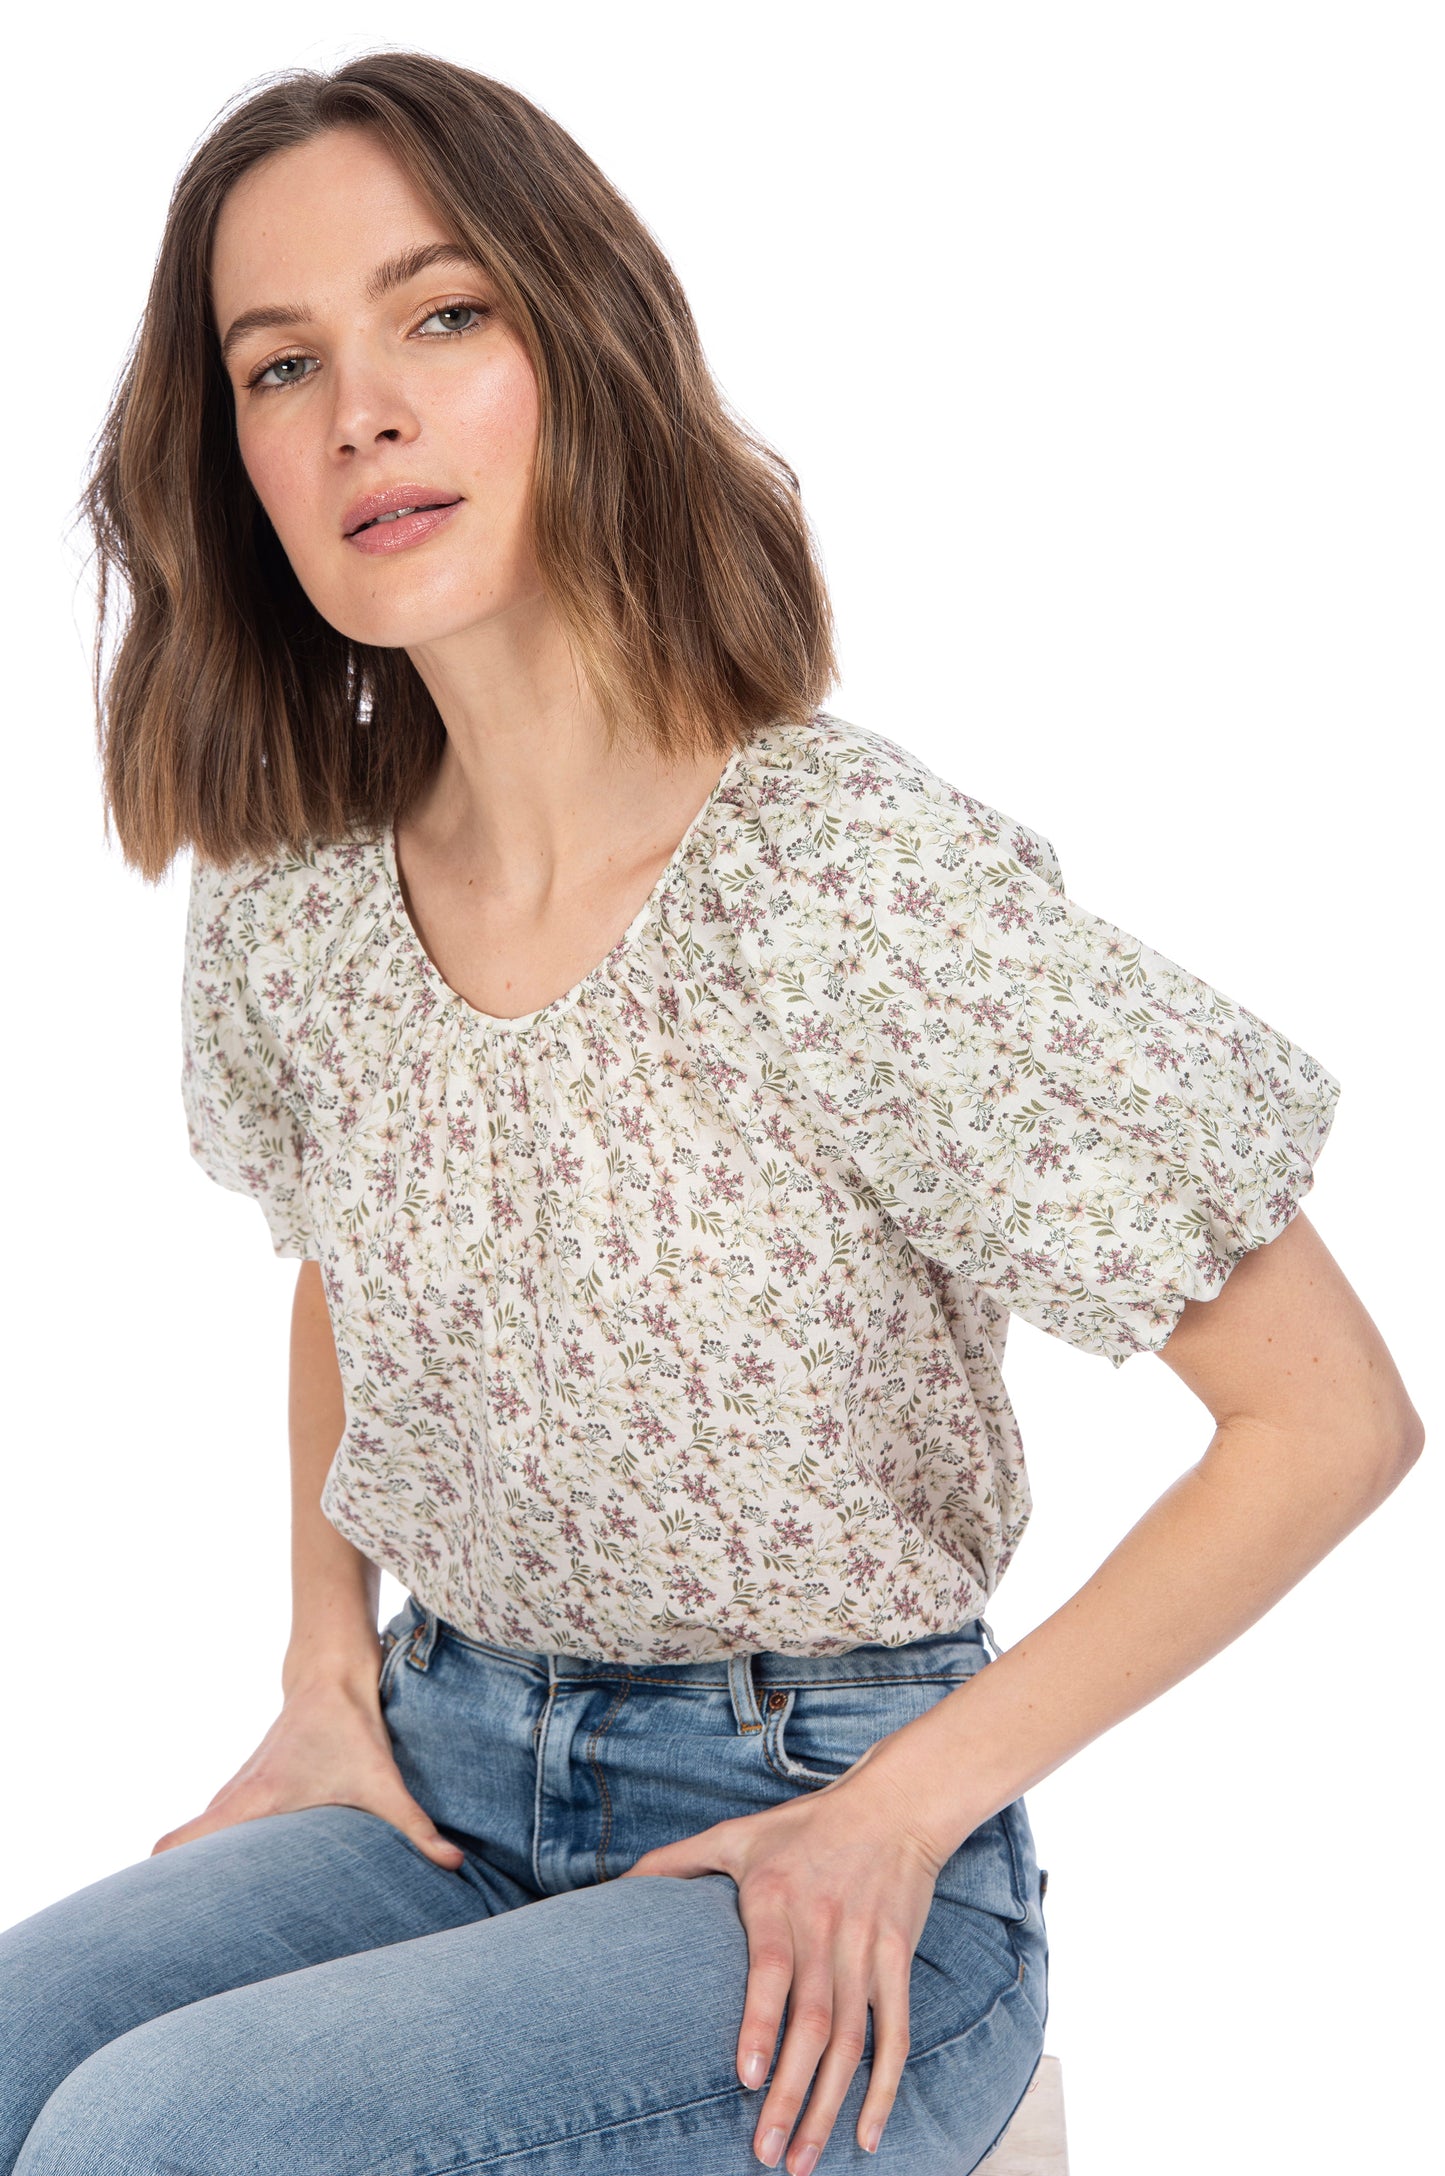 A woman with shoulder-length brown hair, wearing a crewneck B Collection by Bobeau Bubble Sleeve Cotton Top with elastic sleeves and blue jeans, casually poses while leaning forward slightly with a neutral expression on her face.